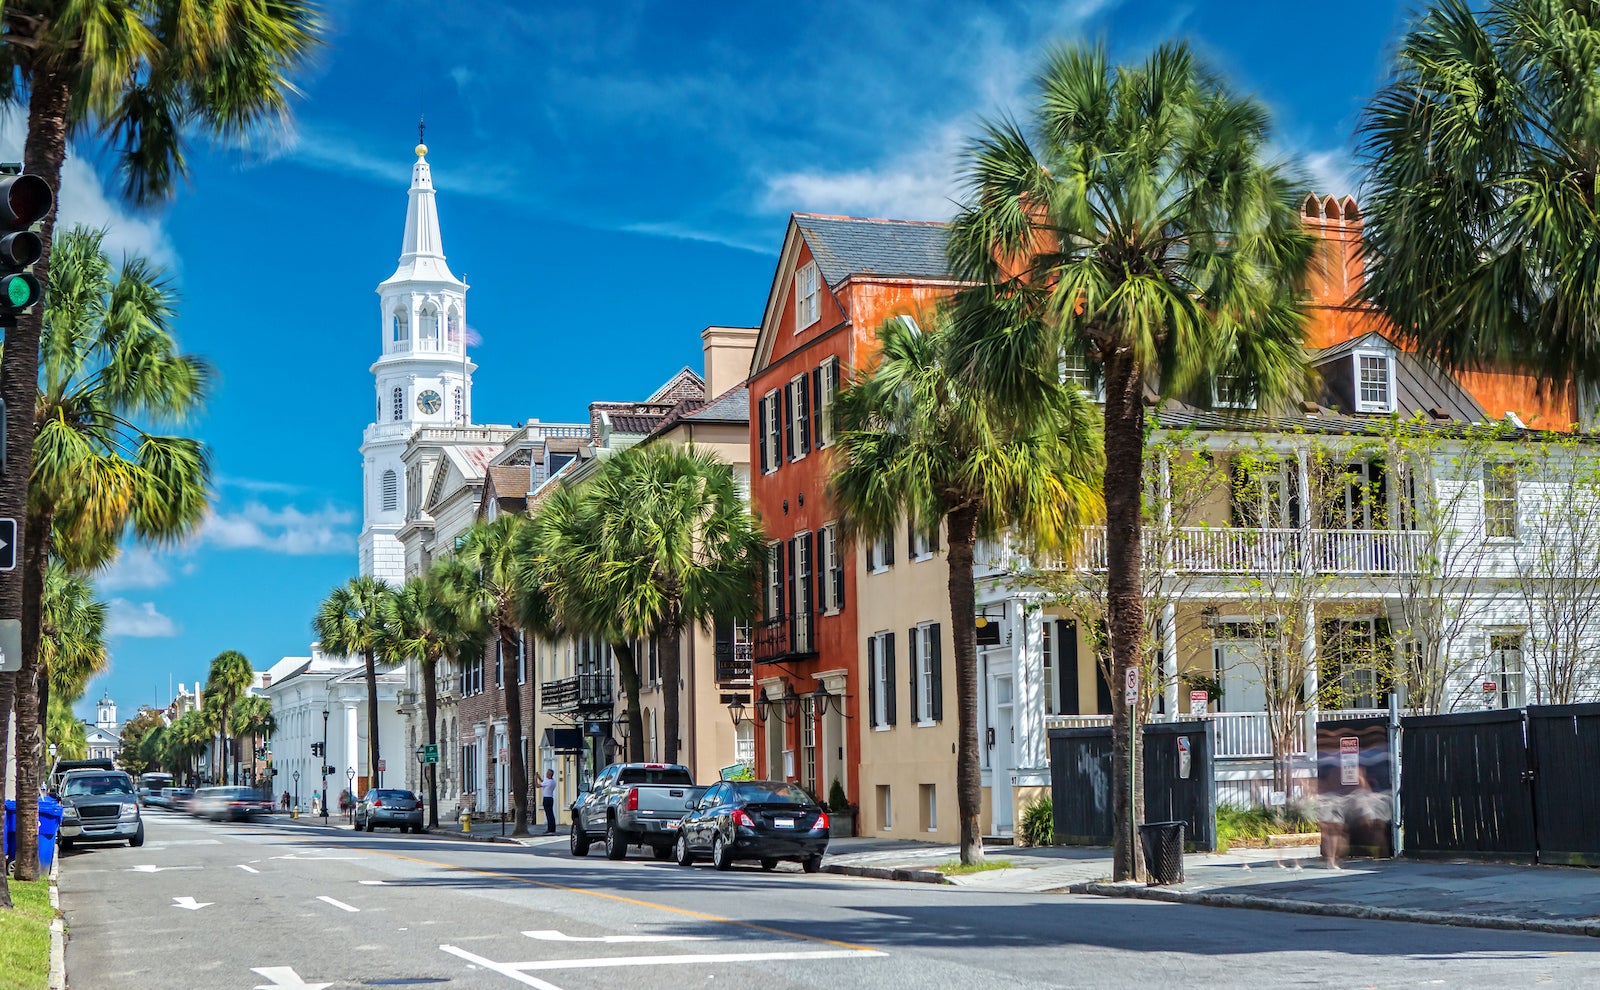 St. Michaels Church and Broad St. in Charleston, SC